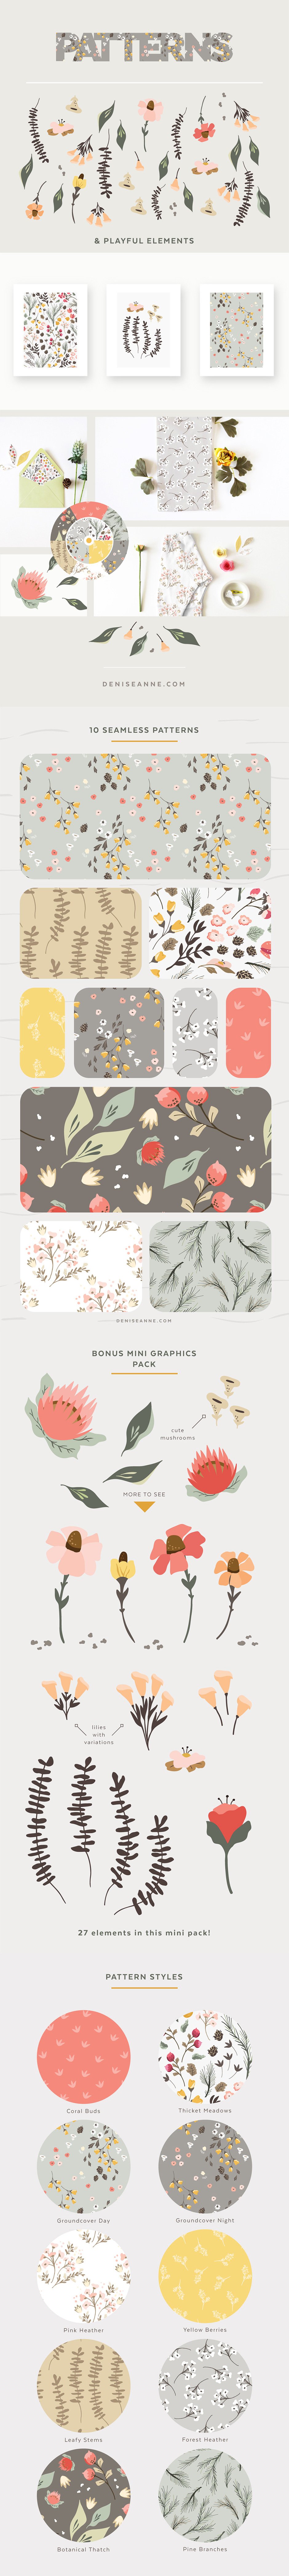 Thicket Thatch: Forest Floral Graphics and Patterns